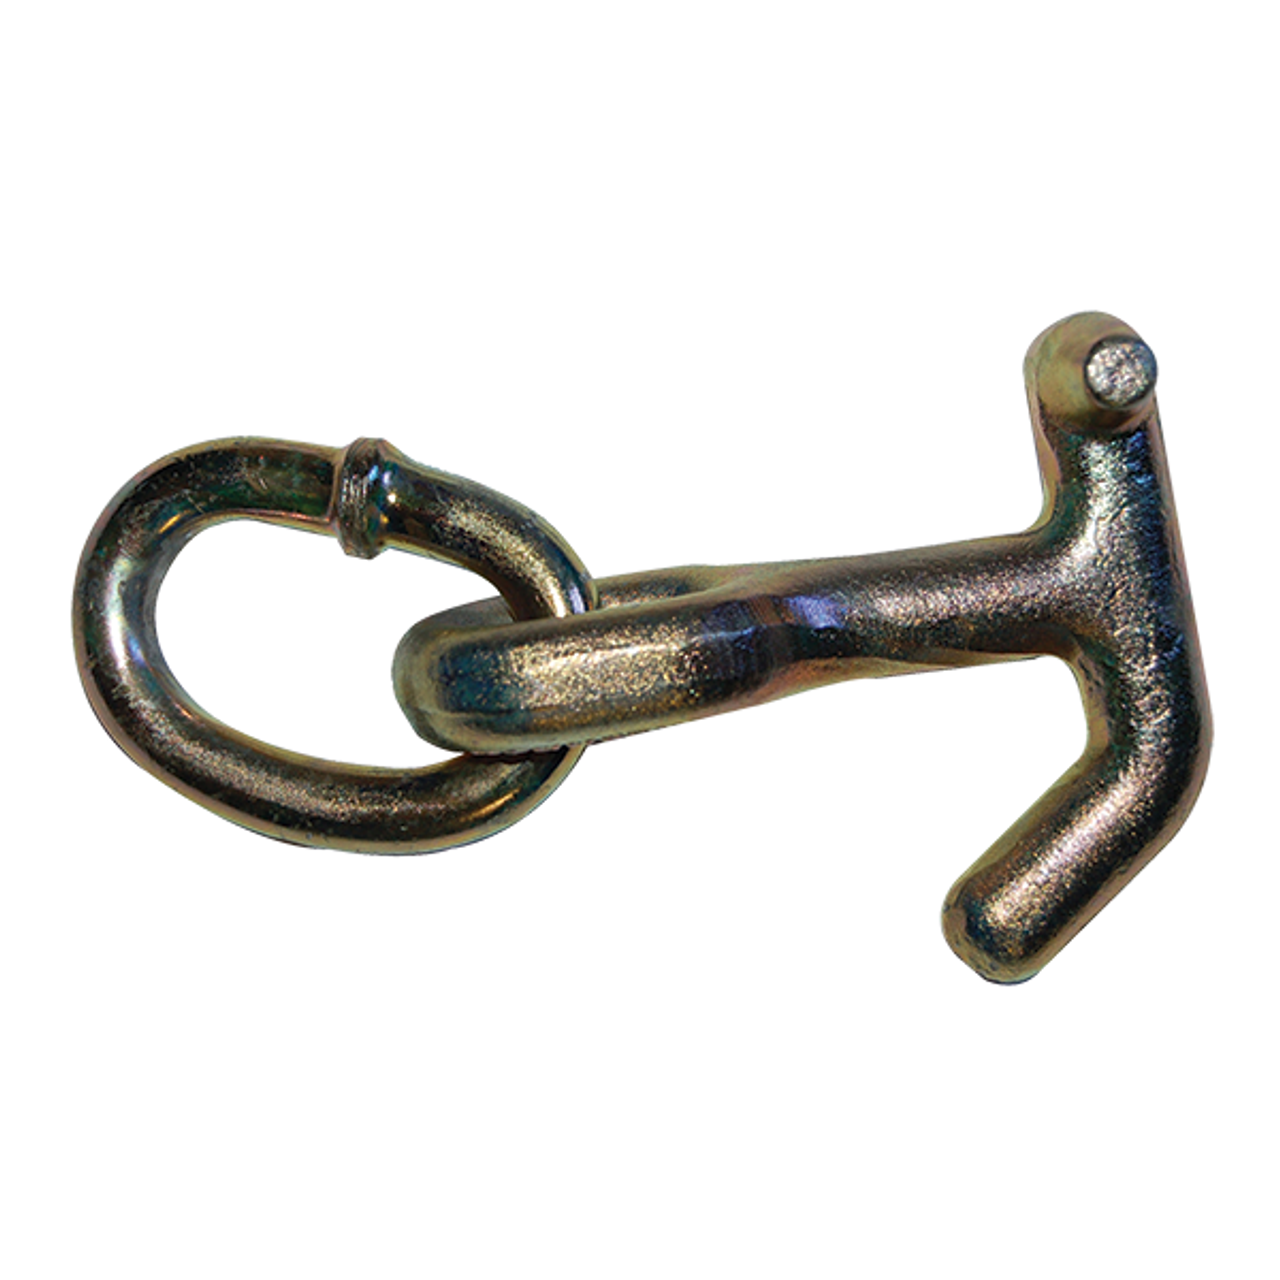 10' Tow Chain 15 J hook and R, T, J cluster